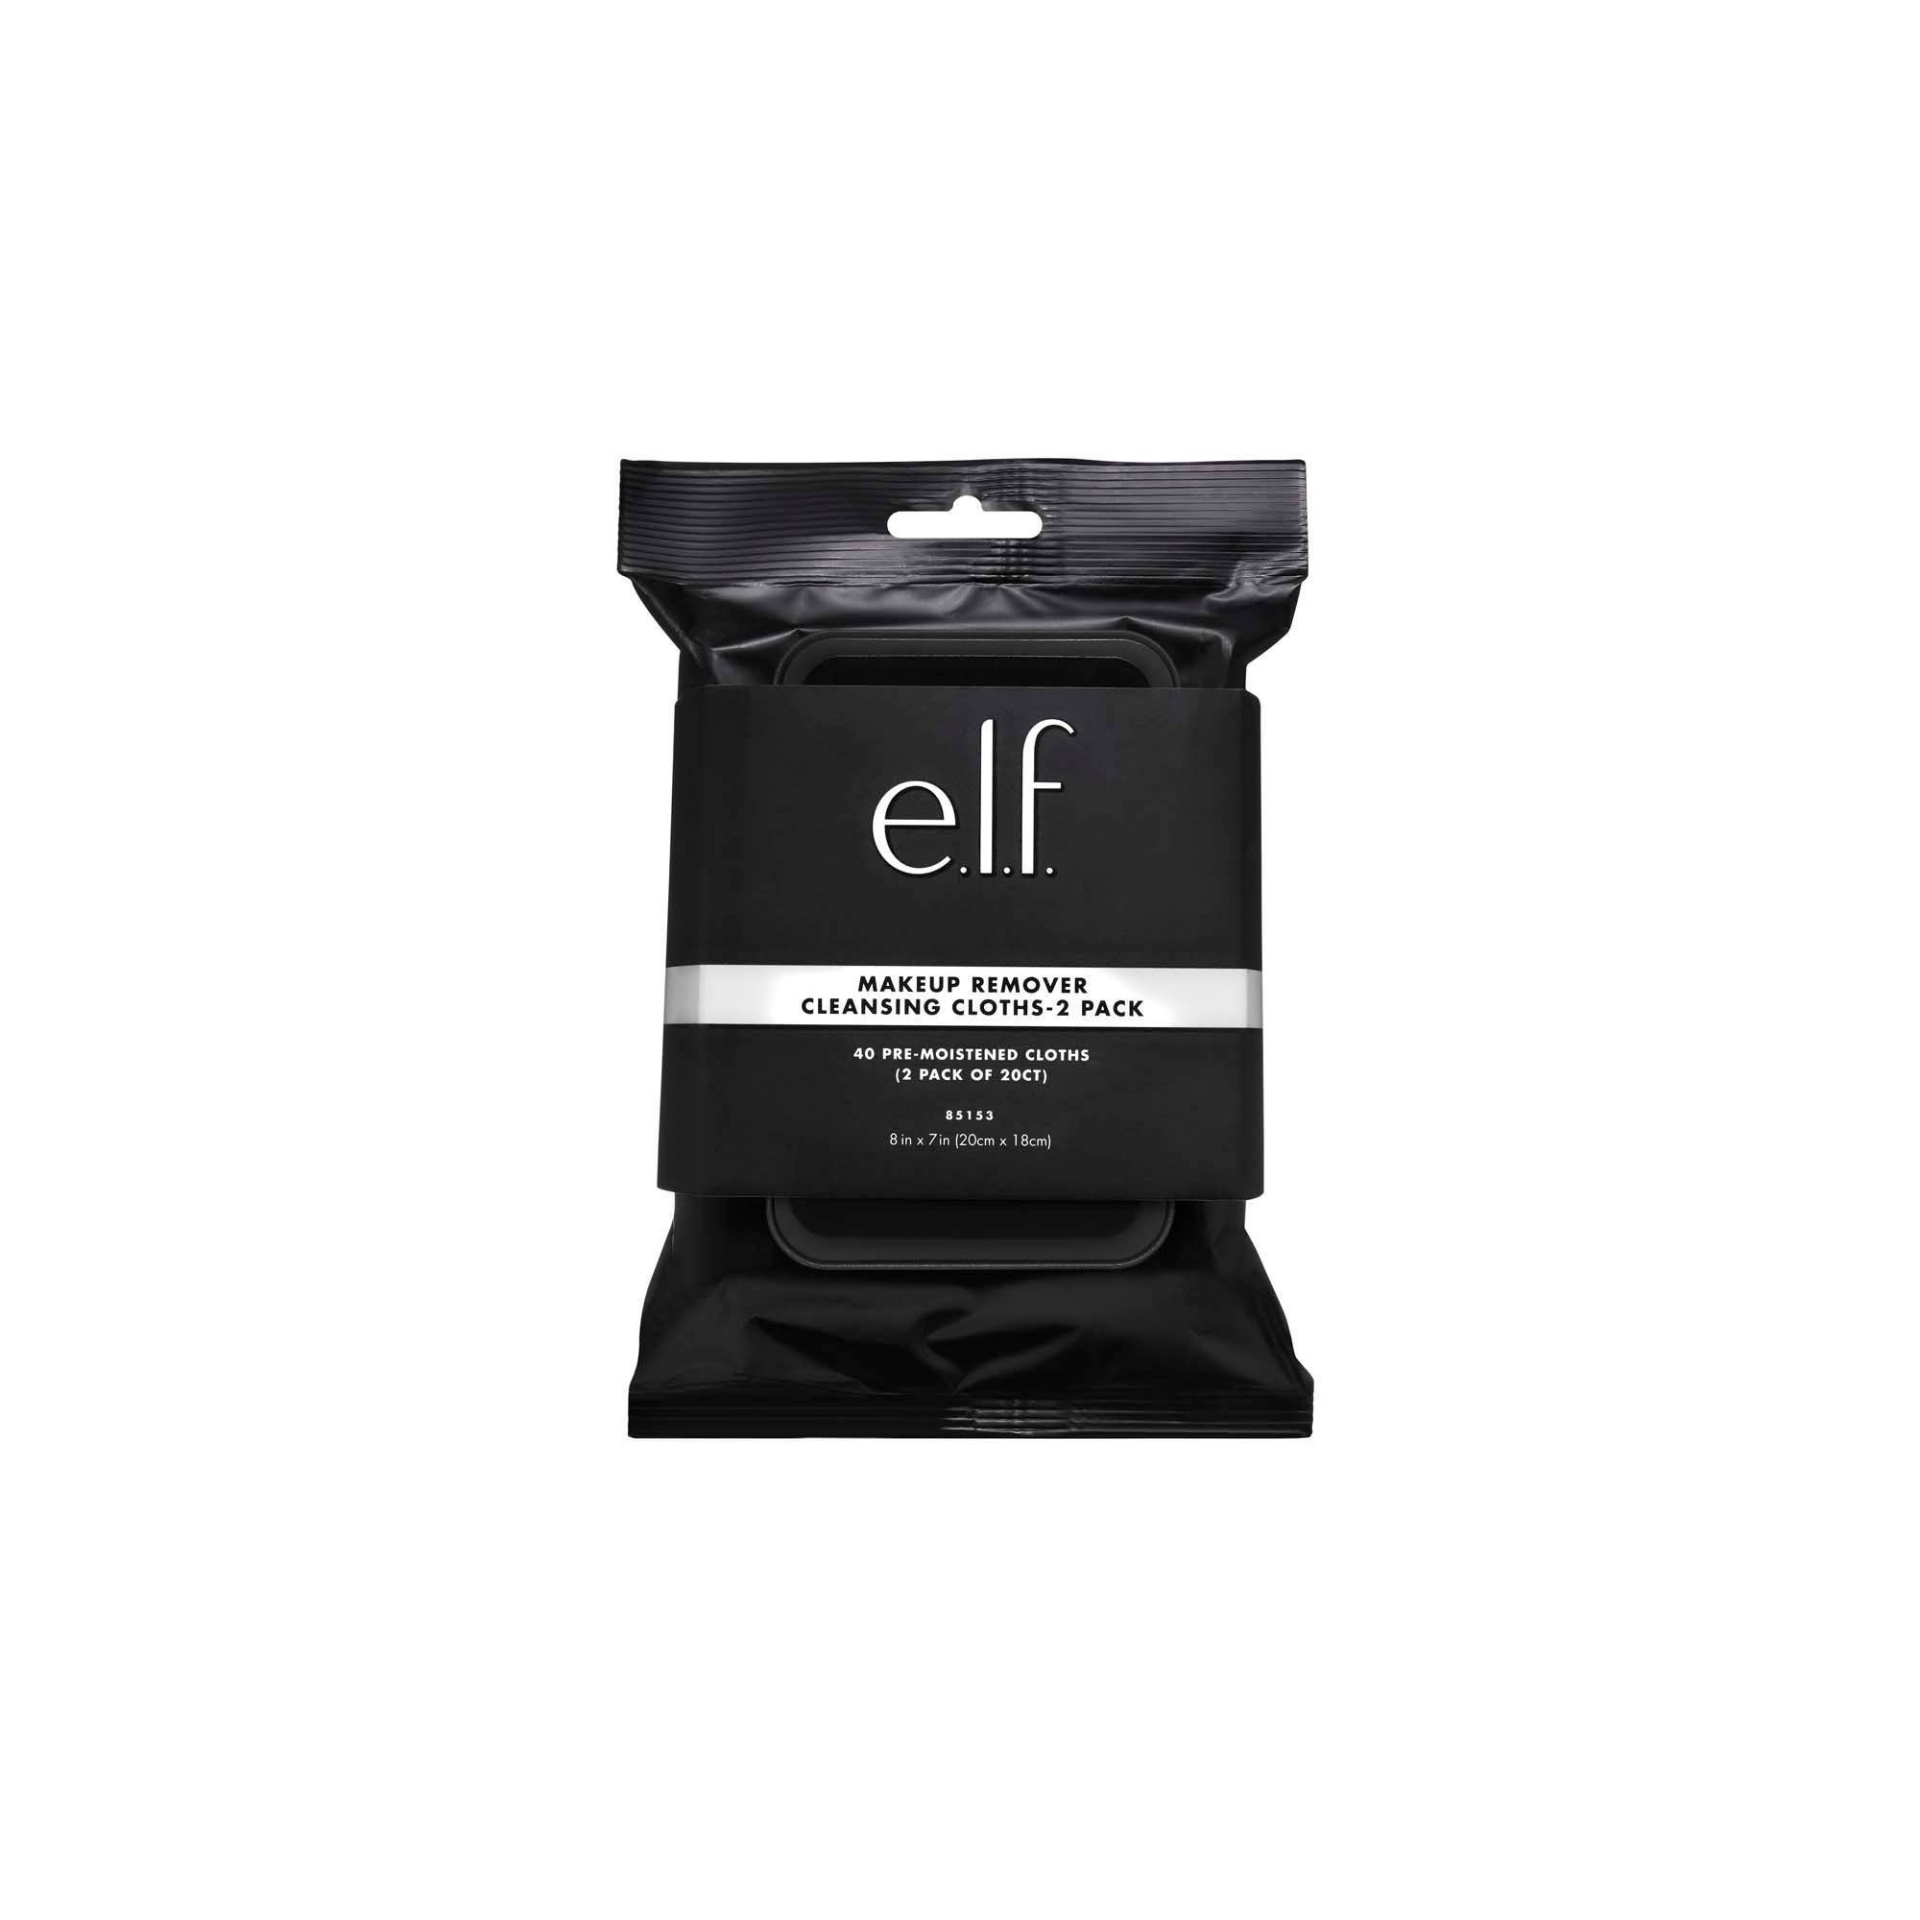 slide 1 of 3, e.l.f. Makeup Remover Cleansing Cloths - 2 Pack, 2 ct